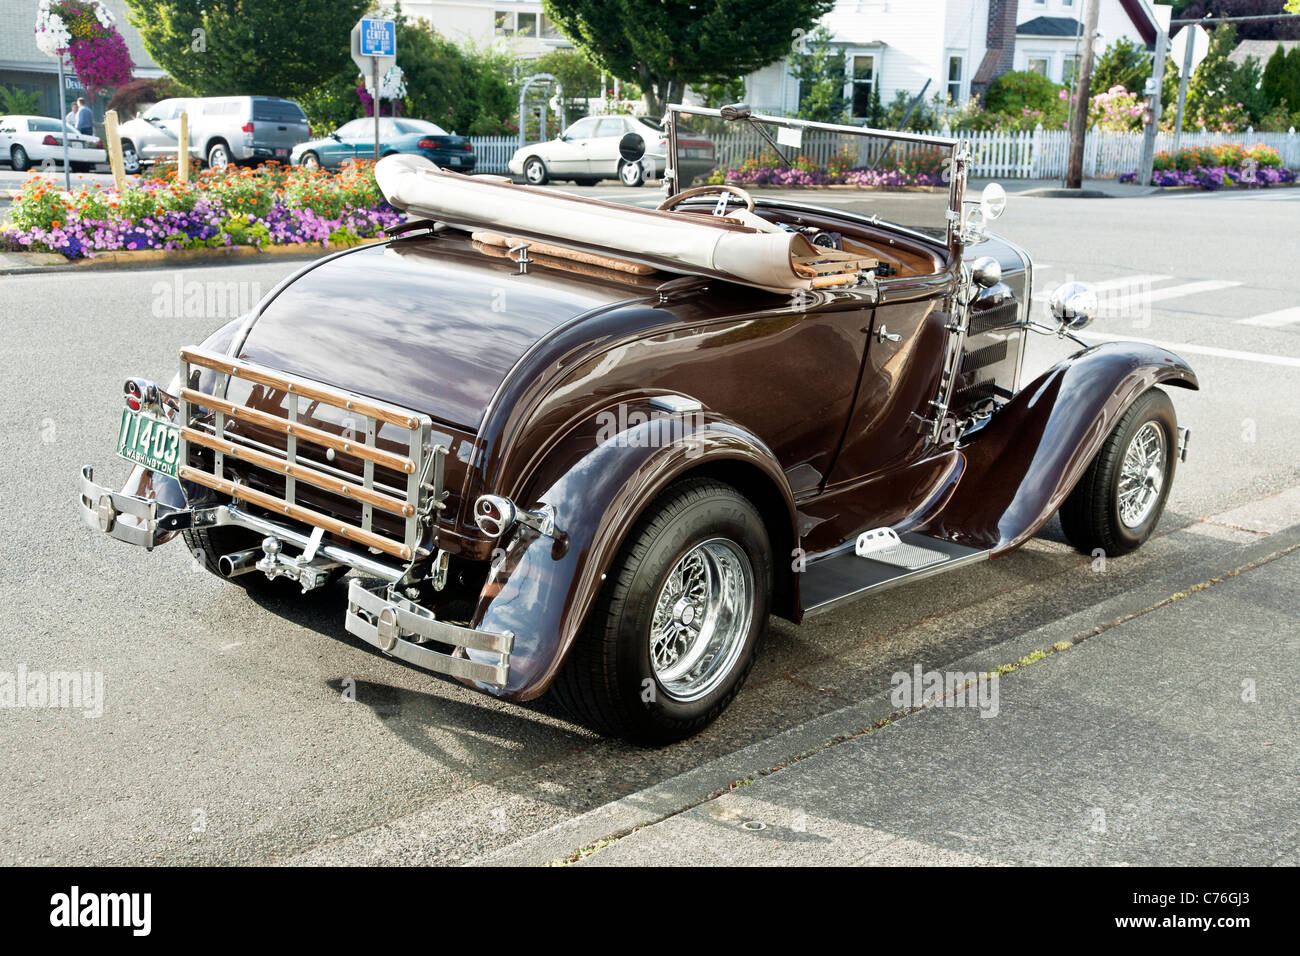 superb restored 1931 vintage chestnut brown Ford Model A cabriolet convertible car with top down parked on street Edmonds WA Stock Photo